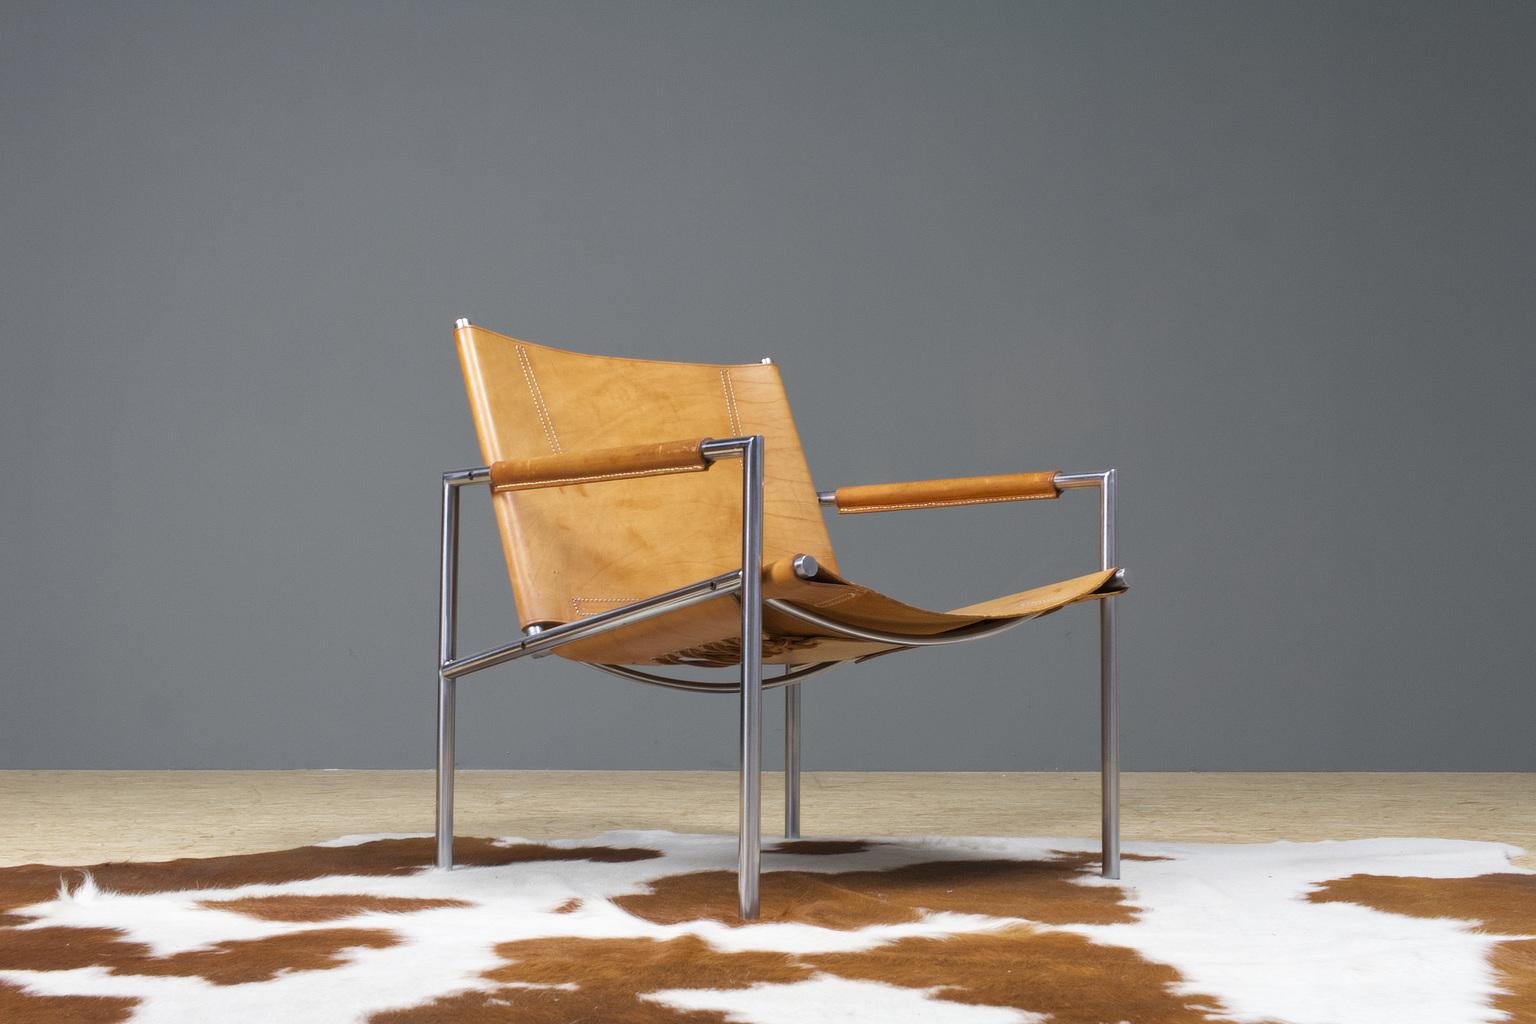 A vintage and original SZ02 leather lounge chair by Dutch designer Martin Visser designed for ’t Spectrum in 1965. The chair is executed in a brown /tan colored saddle leather and has leather upholstered armrest. The piece has great detailing of the